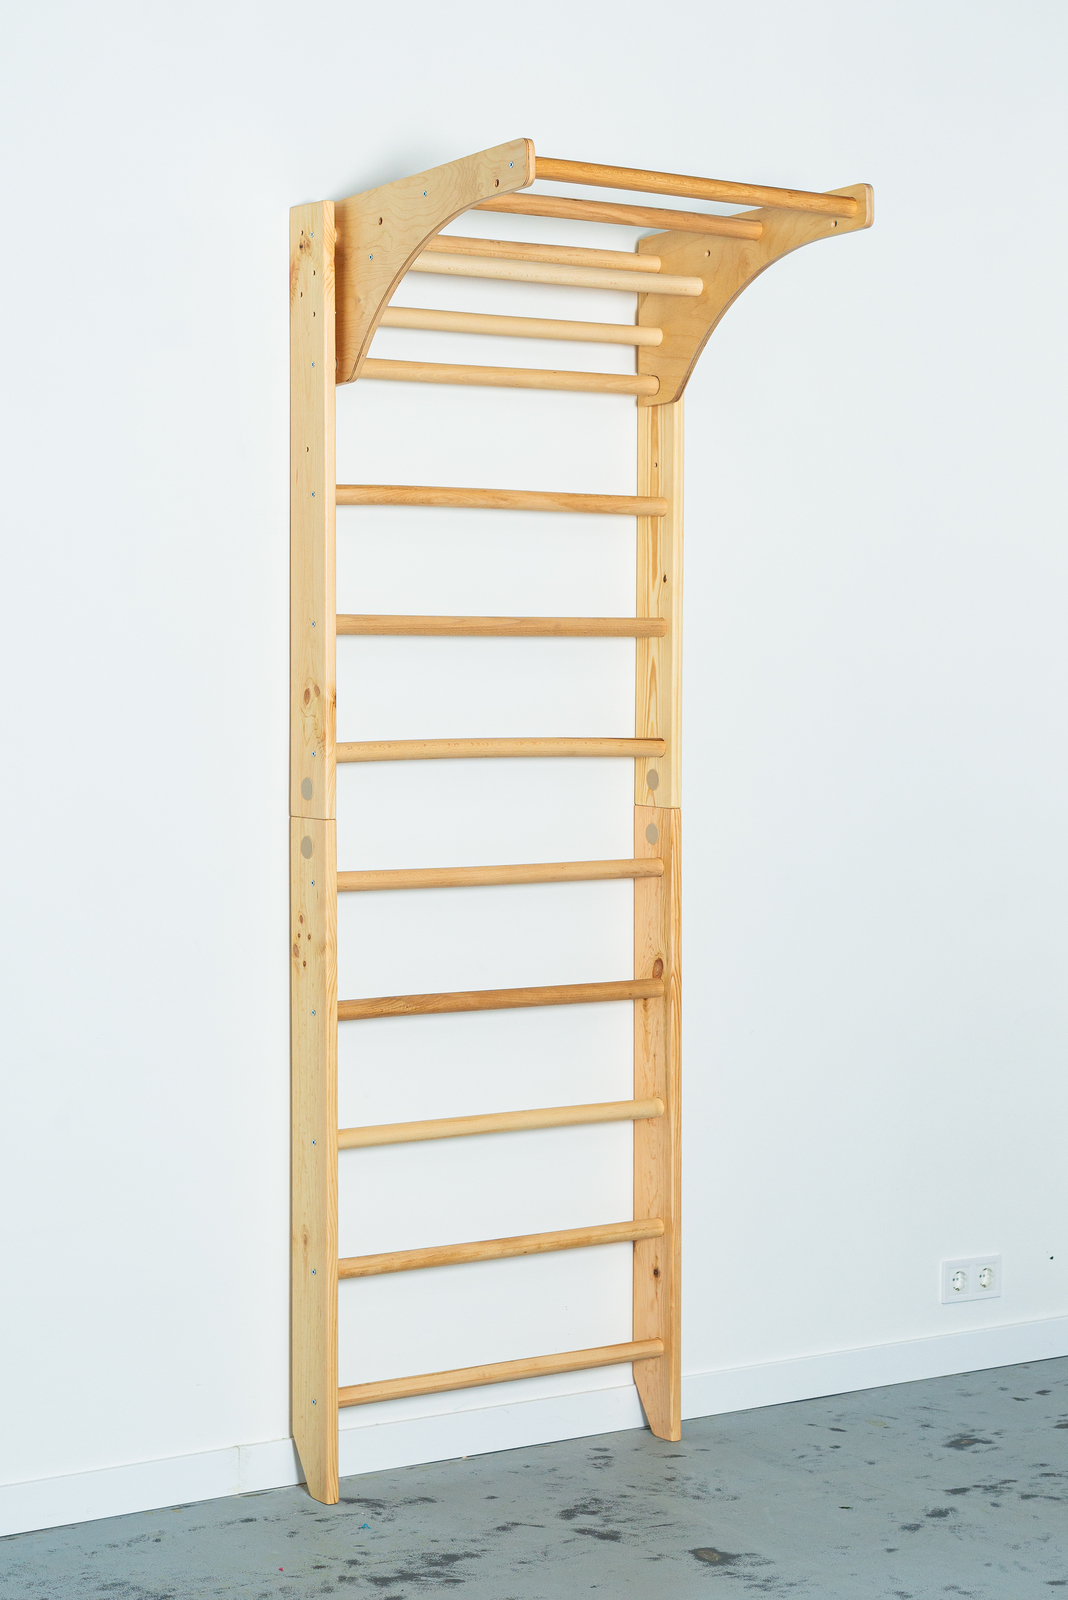 Primary image for Wooden Wall Stall Bars - Swedish Ladder with Pull Up bar for Home Gym